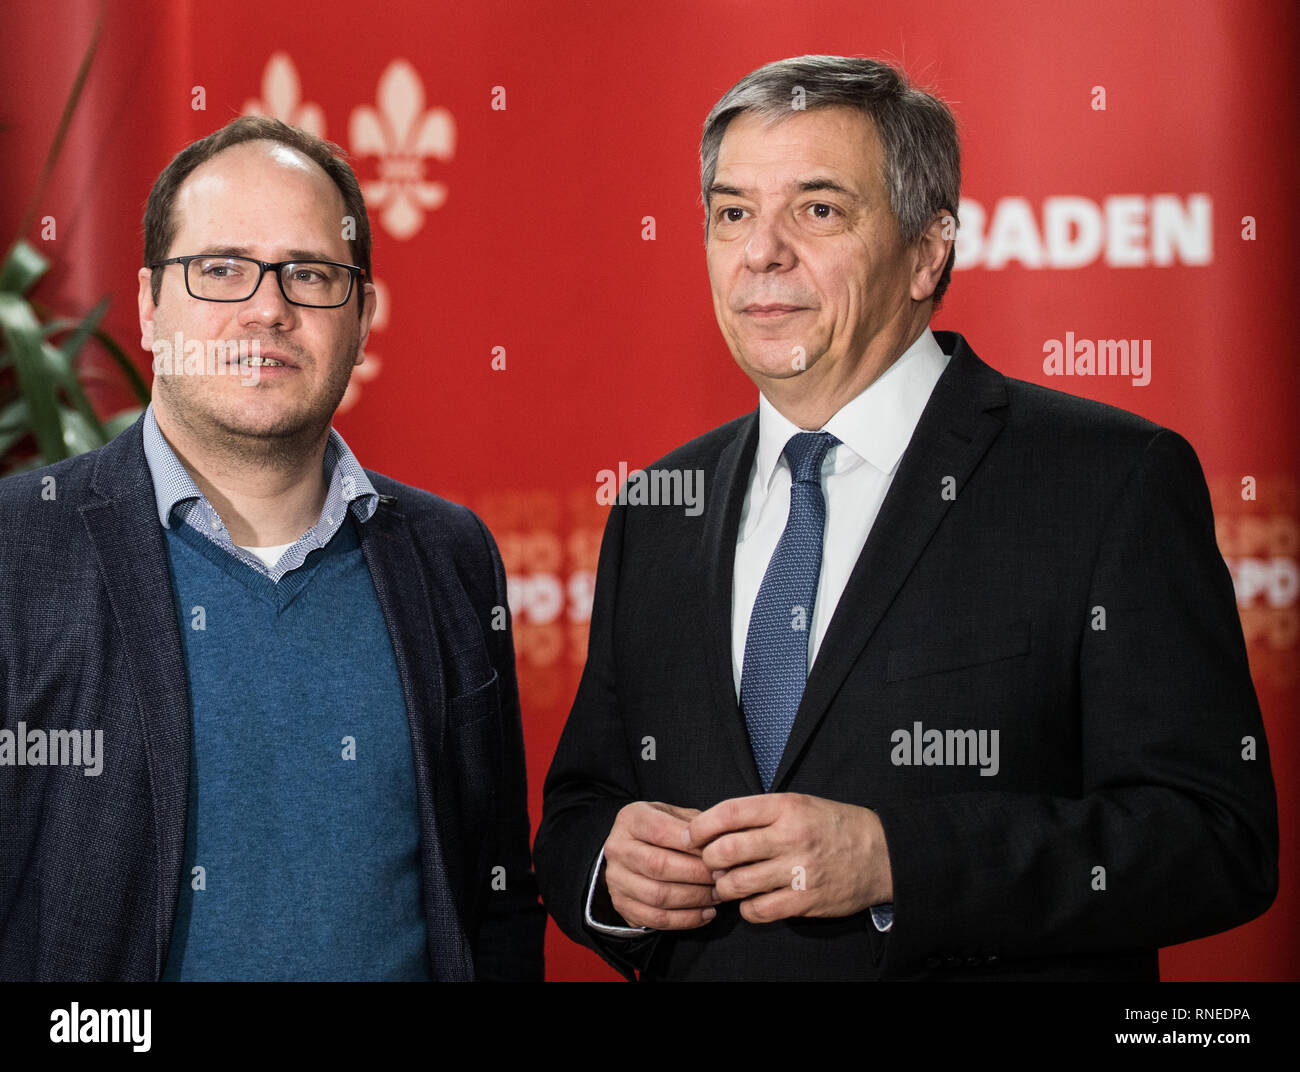 Wiesbaden, Germany. 19th Feb, 2019. Dennis Volk-Borowski (l, SPD), party leader of the SPD Wiesbaden, is standing next to Gert-Uwe Mende (SPD), the proposed SPD candidate for the OB election, at his presentation. At a press conference, the SPD Wiesbaden presents the candidate proposed by the finding commission for the 2019 mayoral election in the state capital. Credit: Andreas Arnold/dpa/Alamy Live News Stock Photo